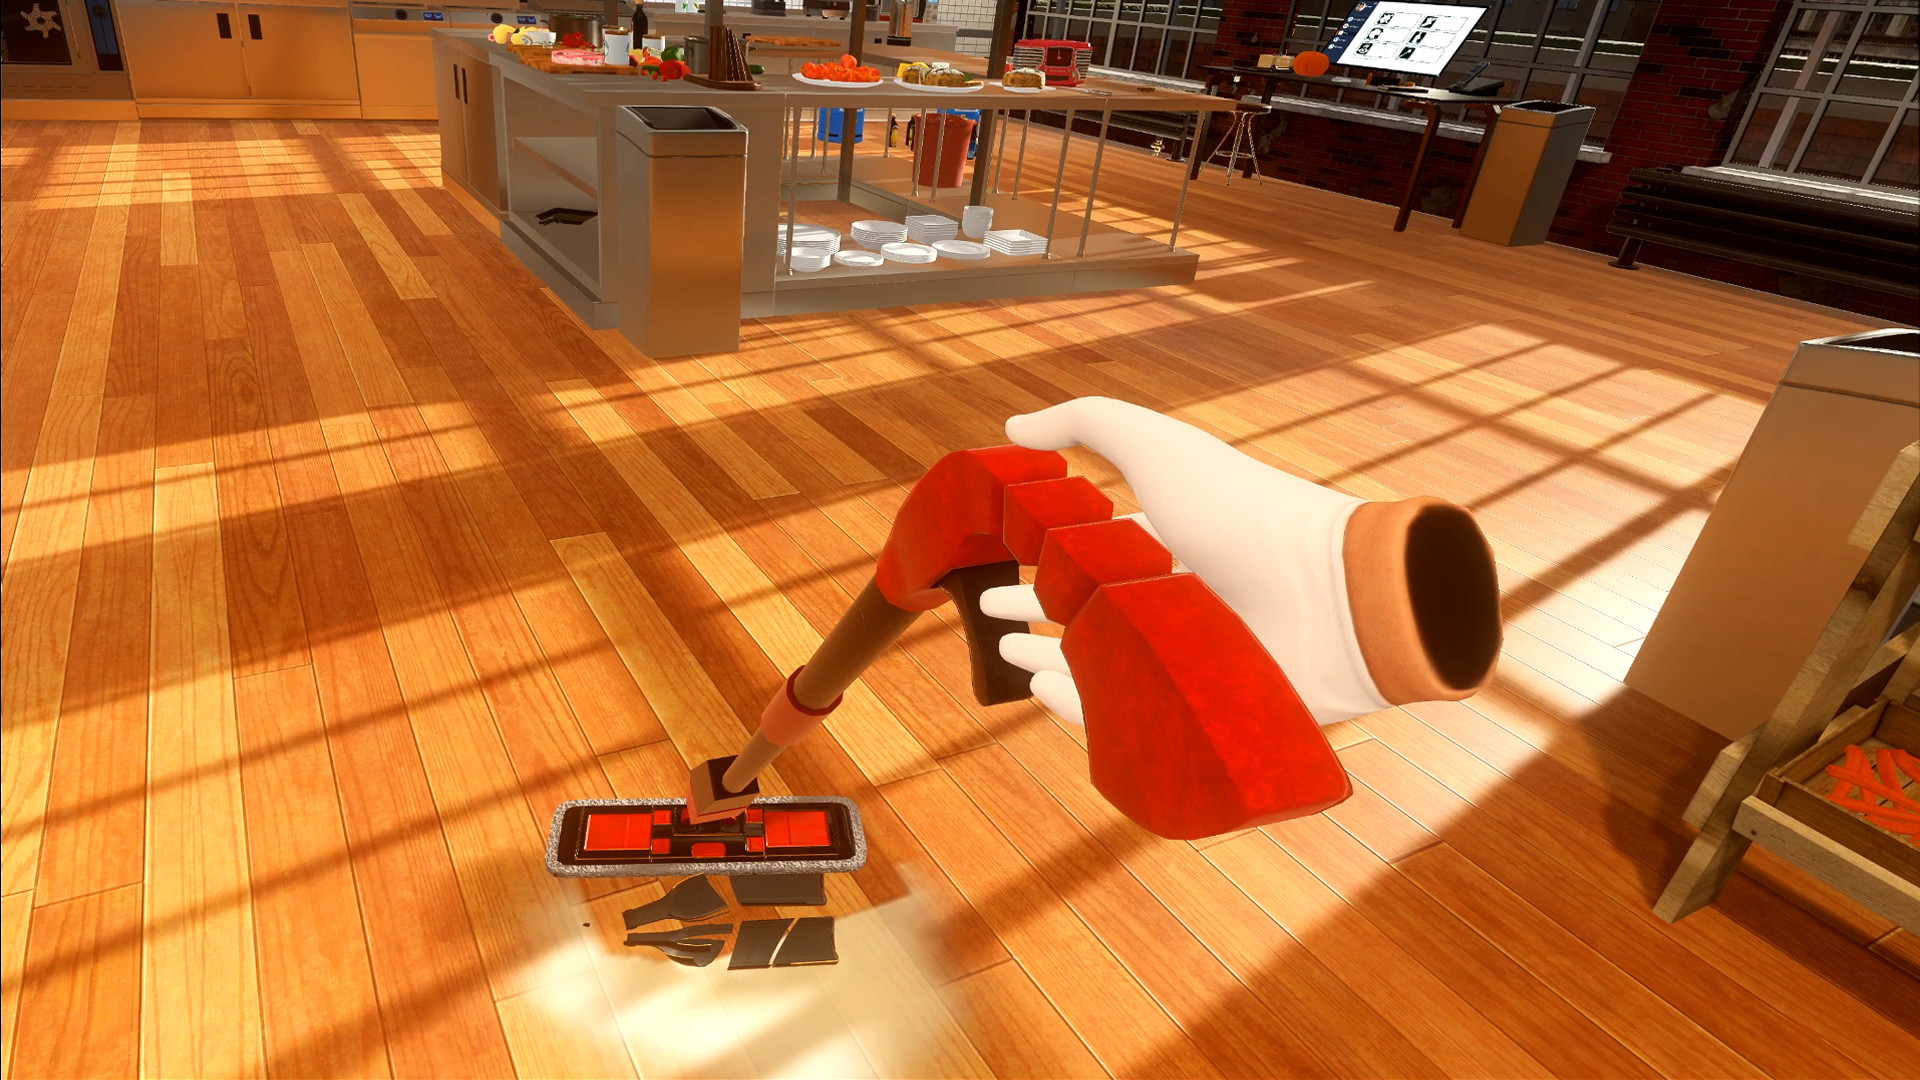 PlayWay - Cooking Simulator VR is Steam VR Game of the Year!